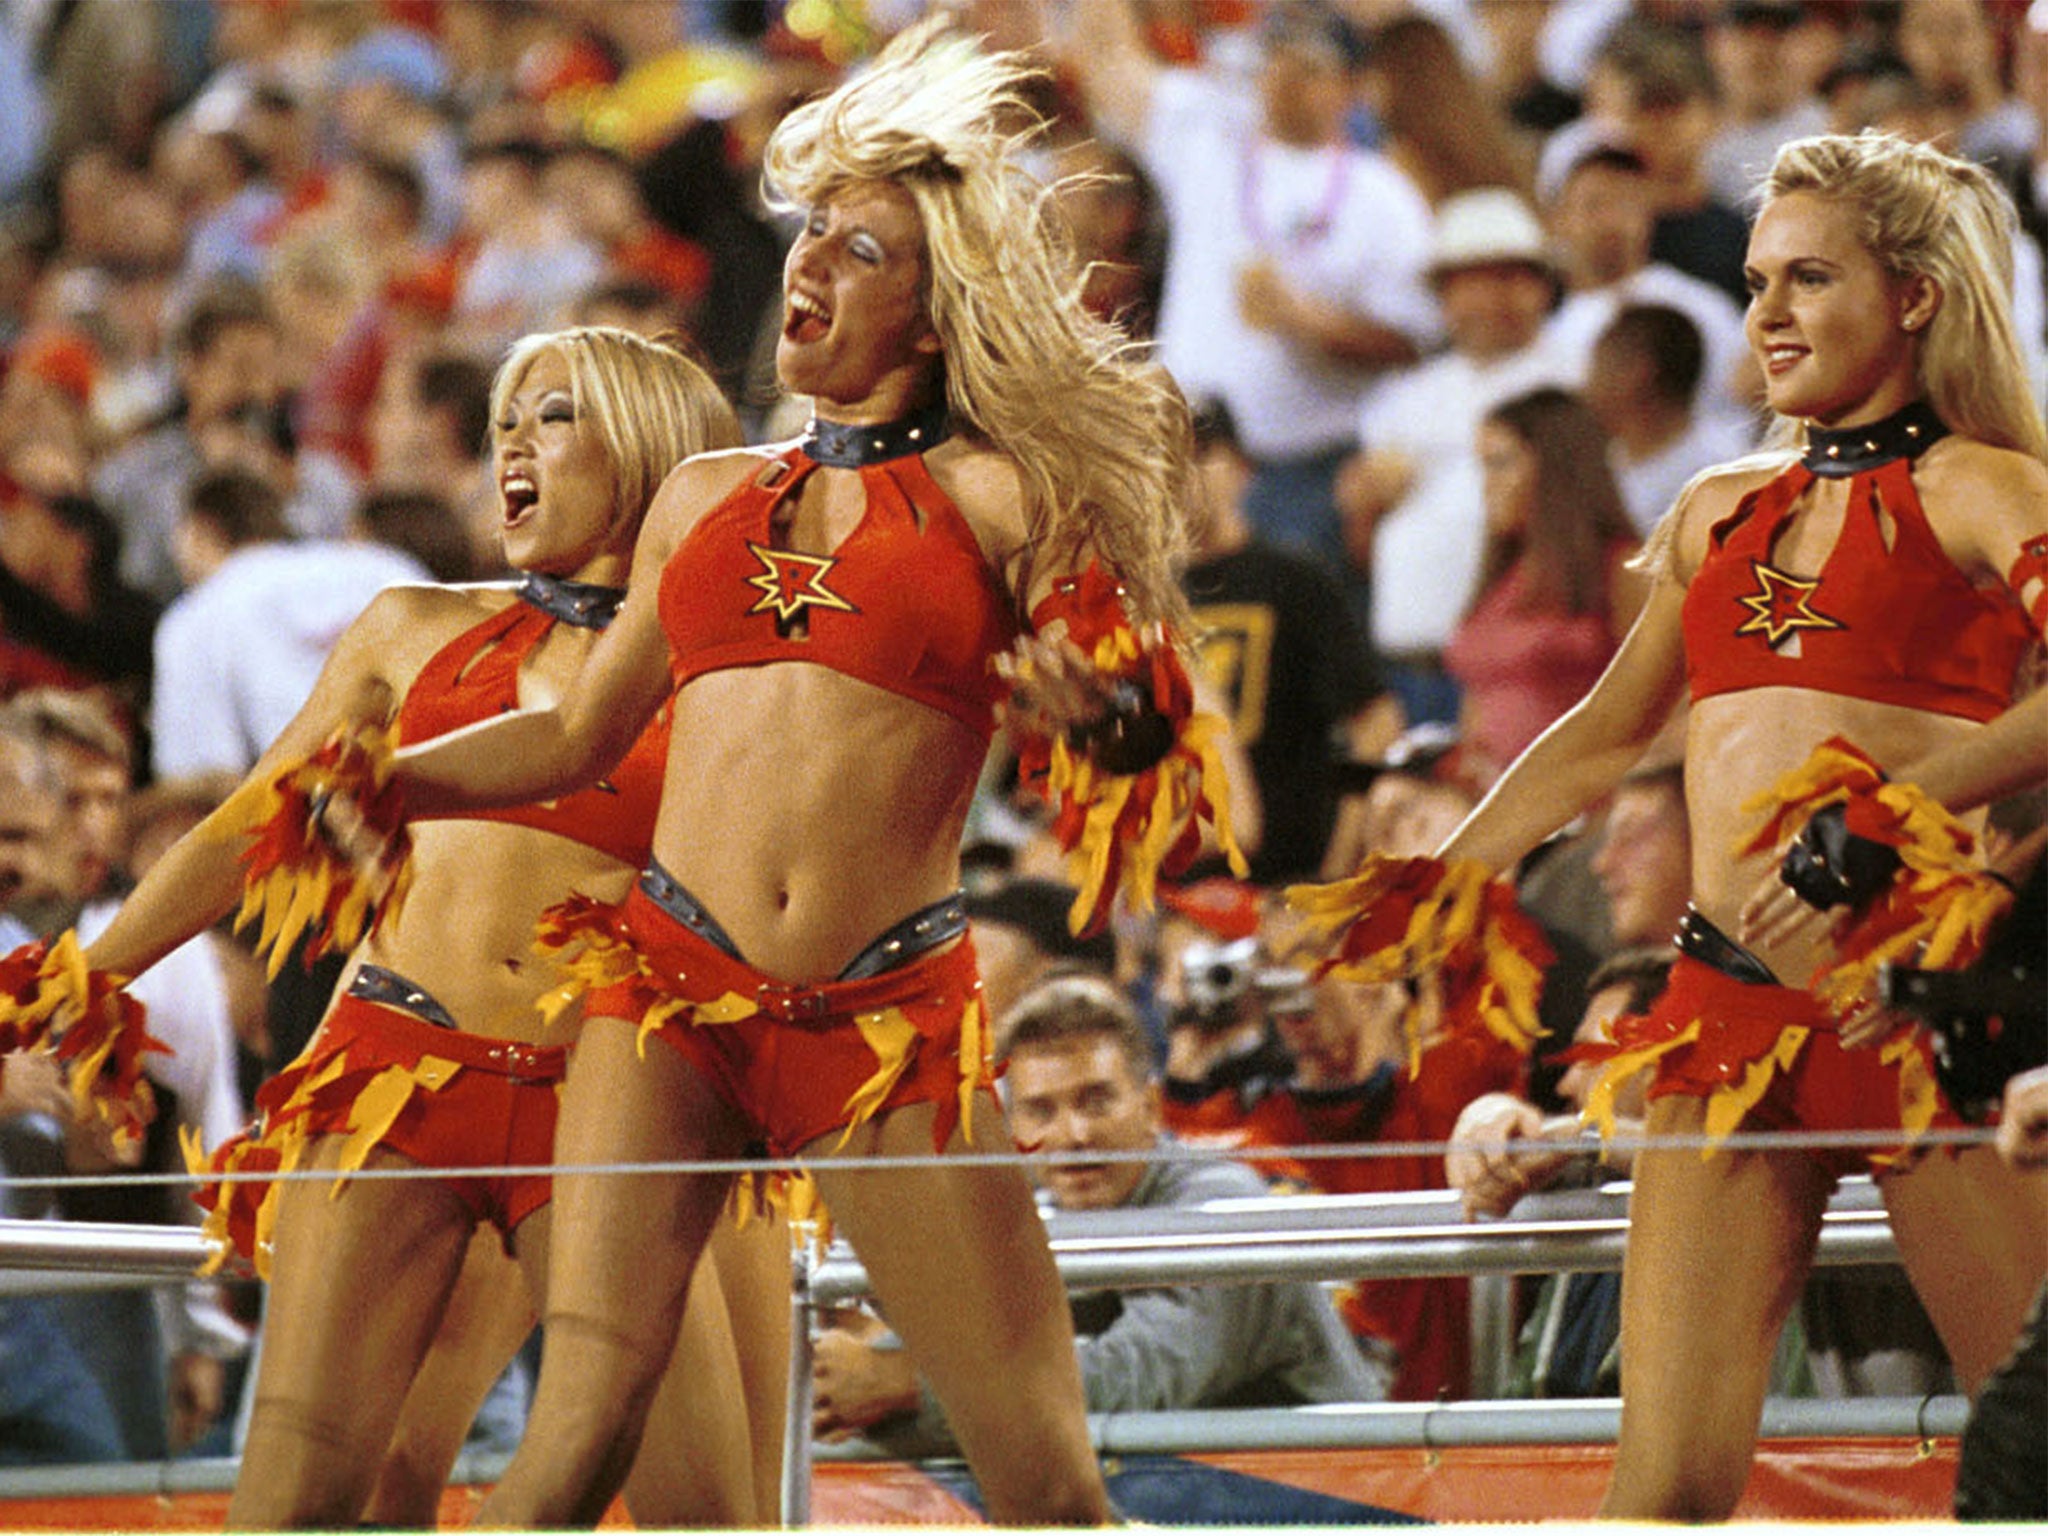 The XFL brought in skimpier cheerleaders to try and differentiate itself